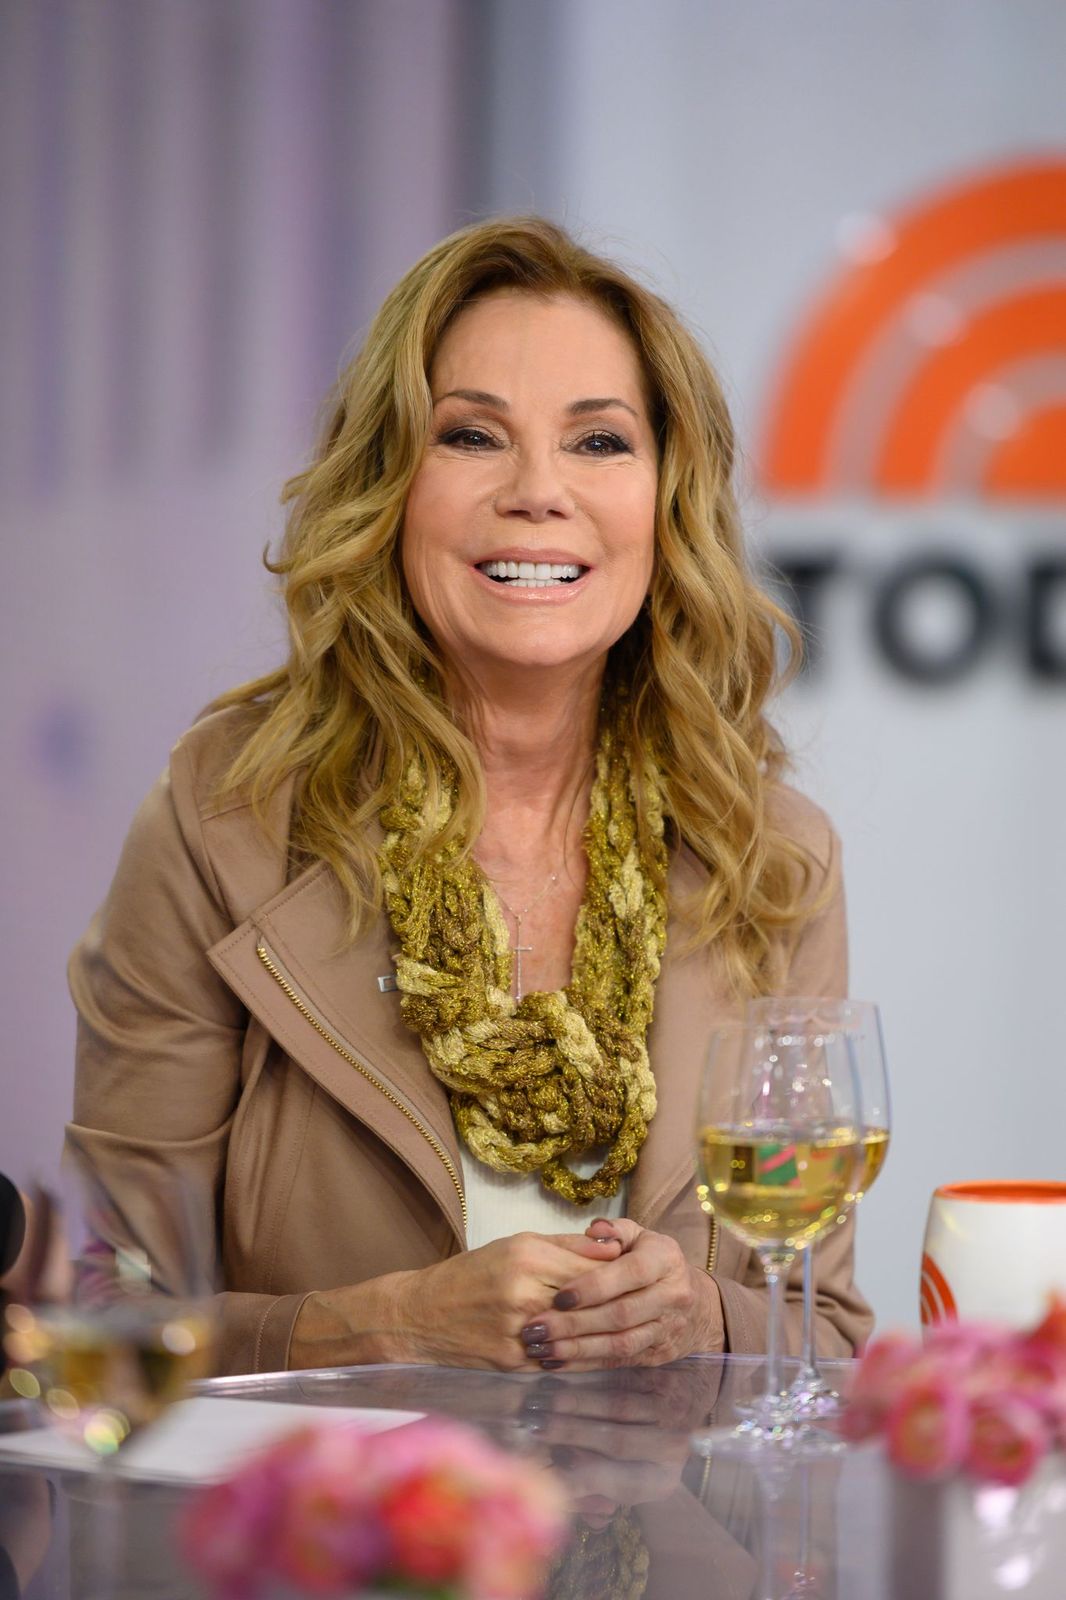  Kathie Lee Gifford on Thursday, January 23, 2020. | Getty Images